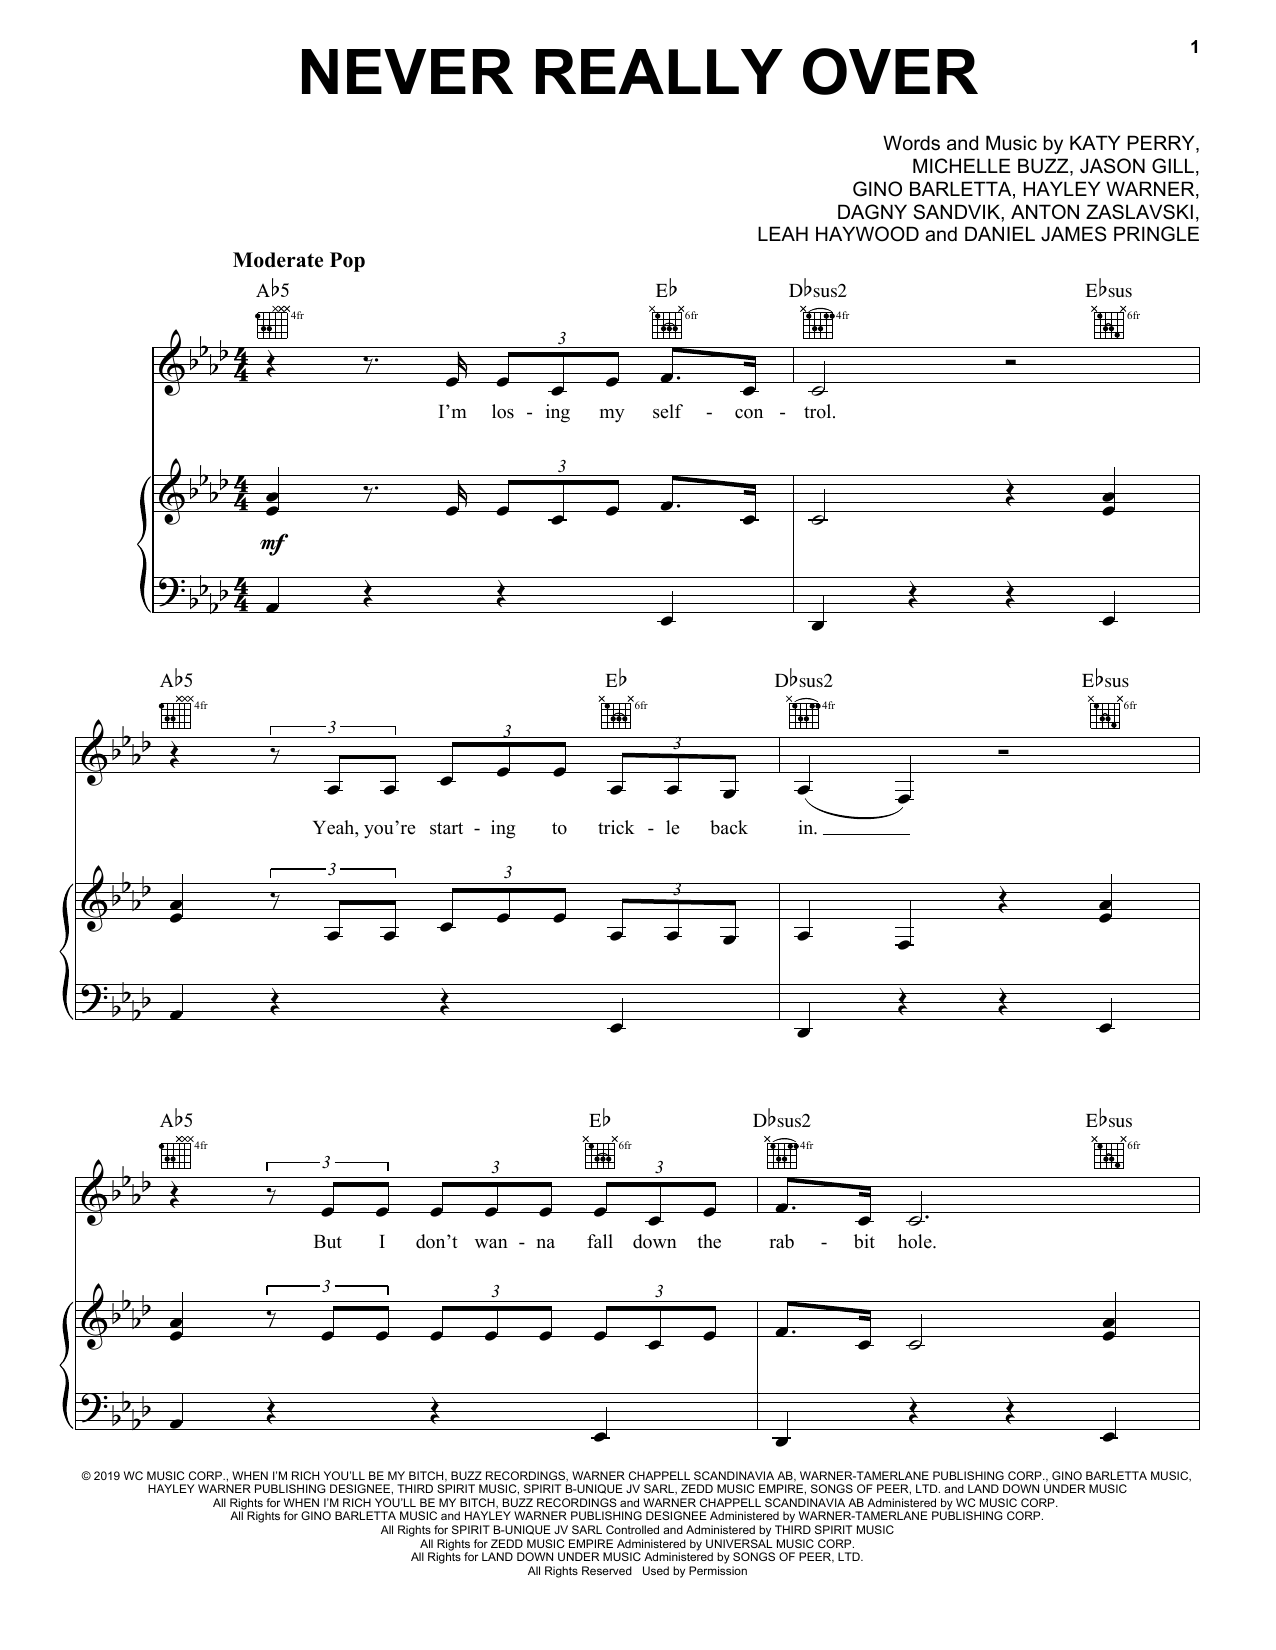 Download Katy Perry Never Really Over Sheet Music